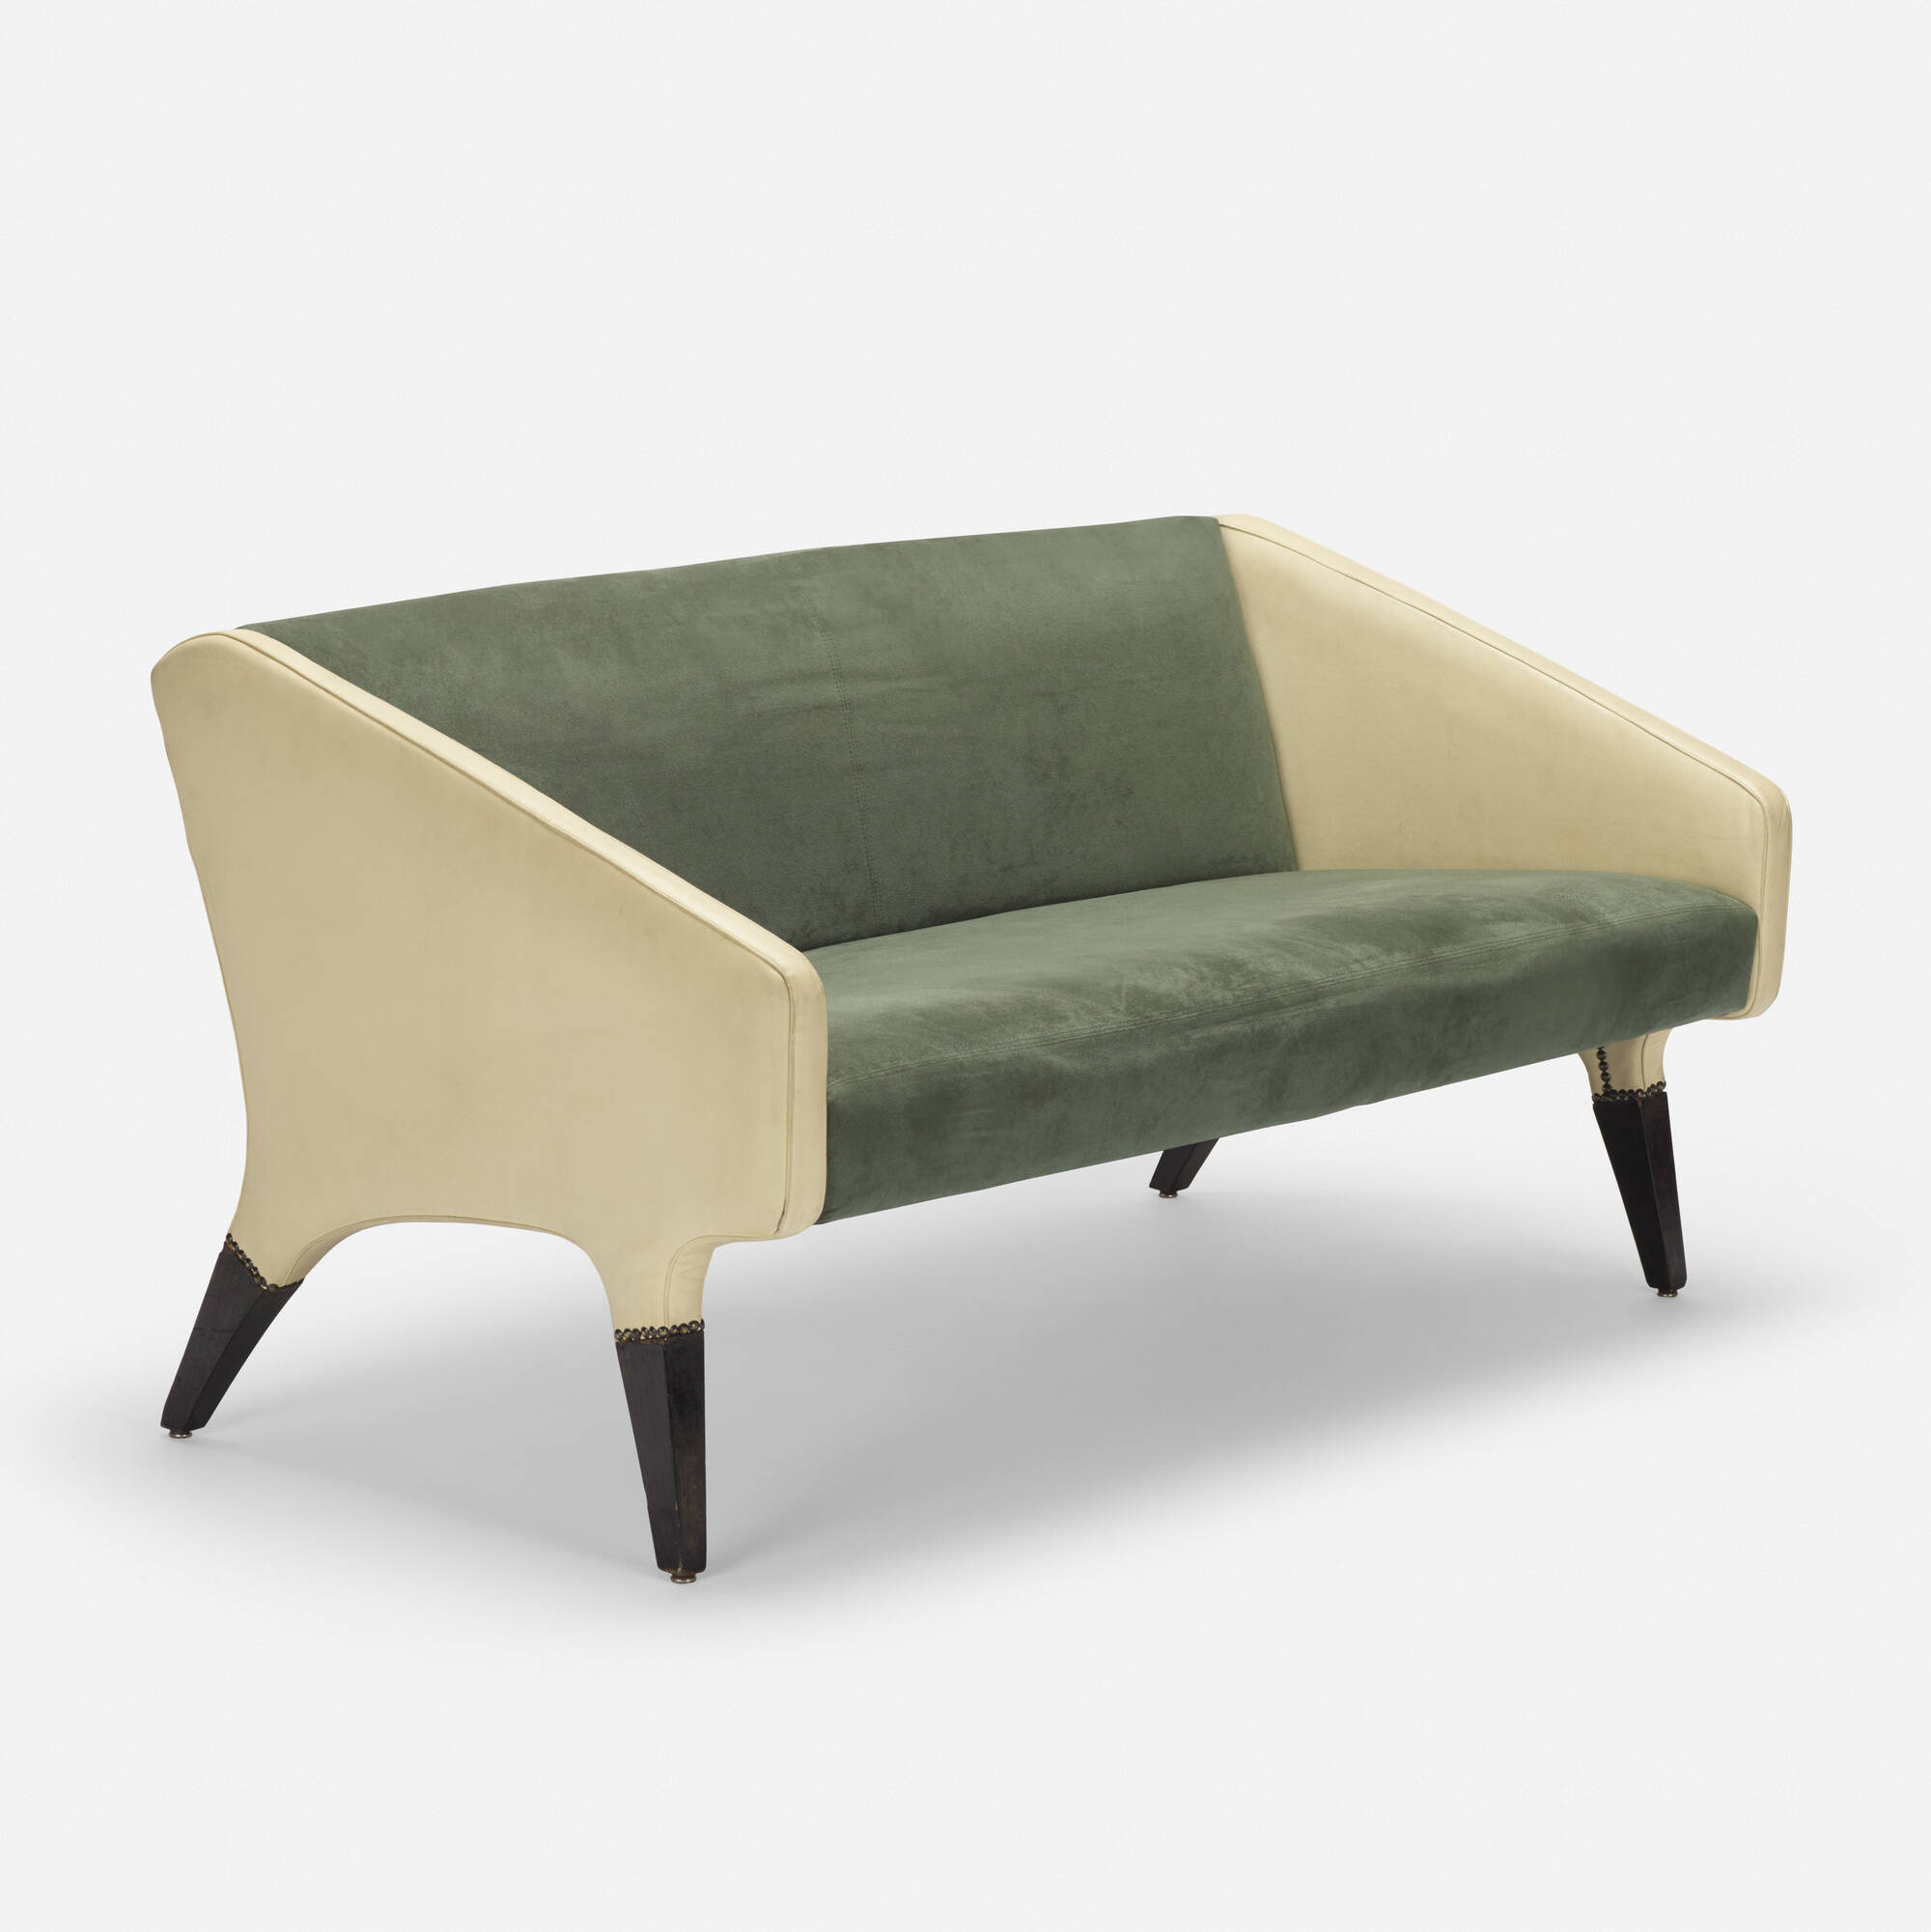 melk apotheek pariteit 356: GIO PONTI, sofa for the Hotel Parco dei Principi, Rome < Important  Design Including Post War + Contemporary Art, 5 June 2019 < Auctions |  Wright: Auctions of Art and Design